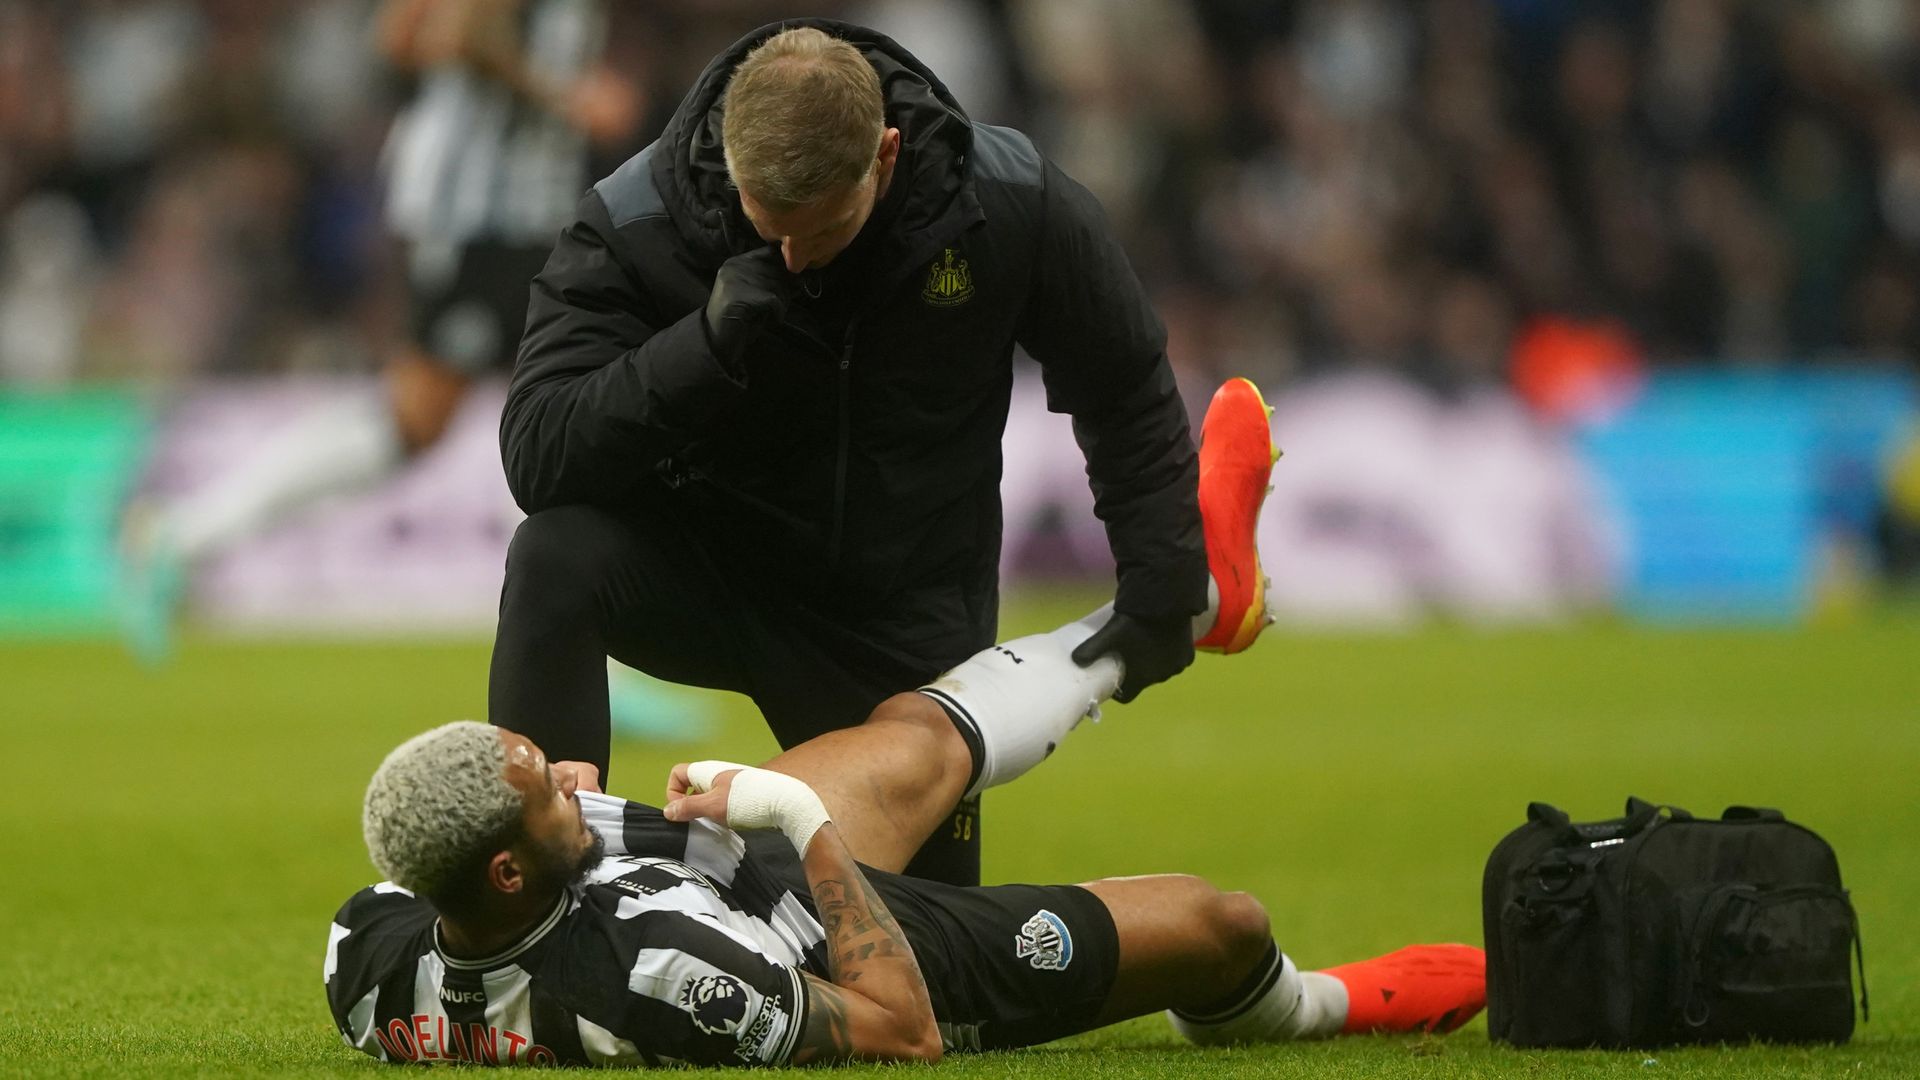 Joelinton out with injury as Howe says FFP stopped Newcastle signing players